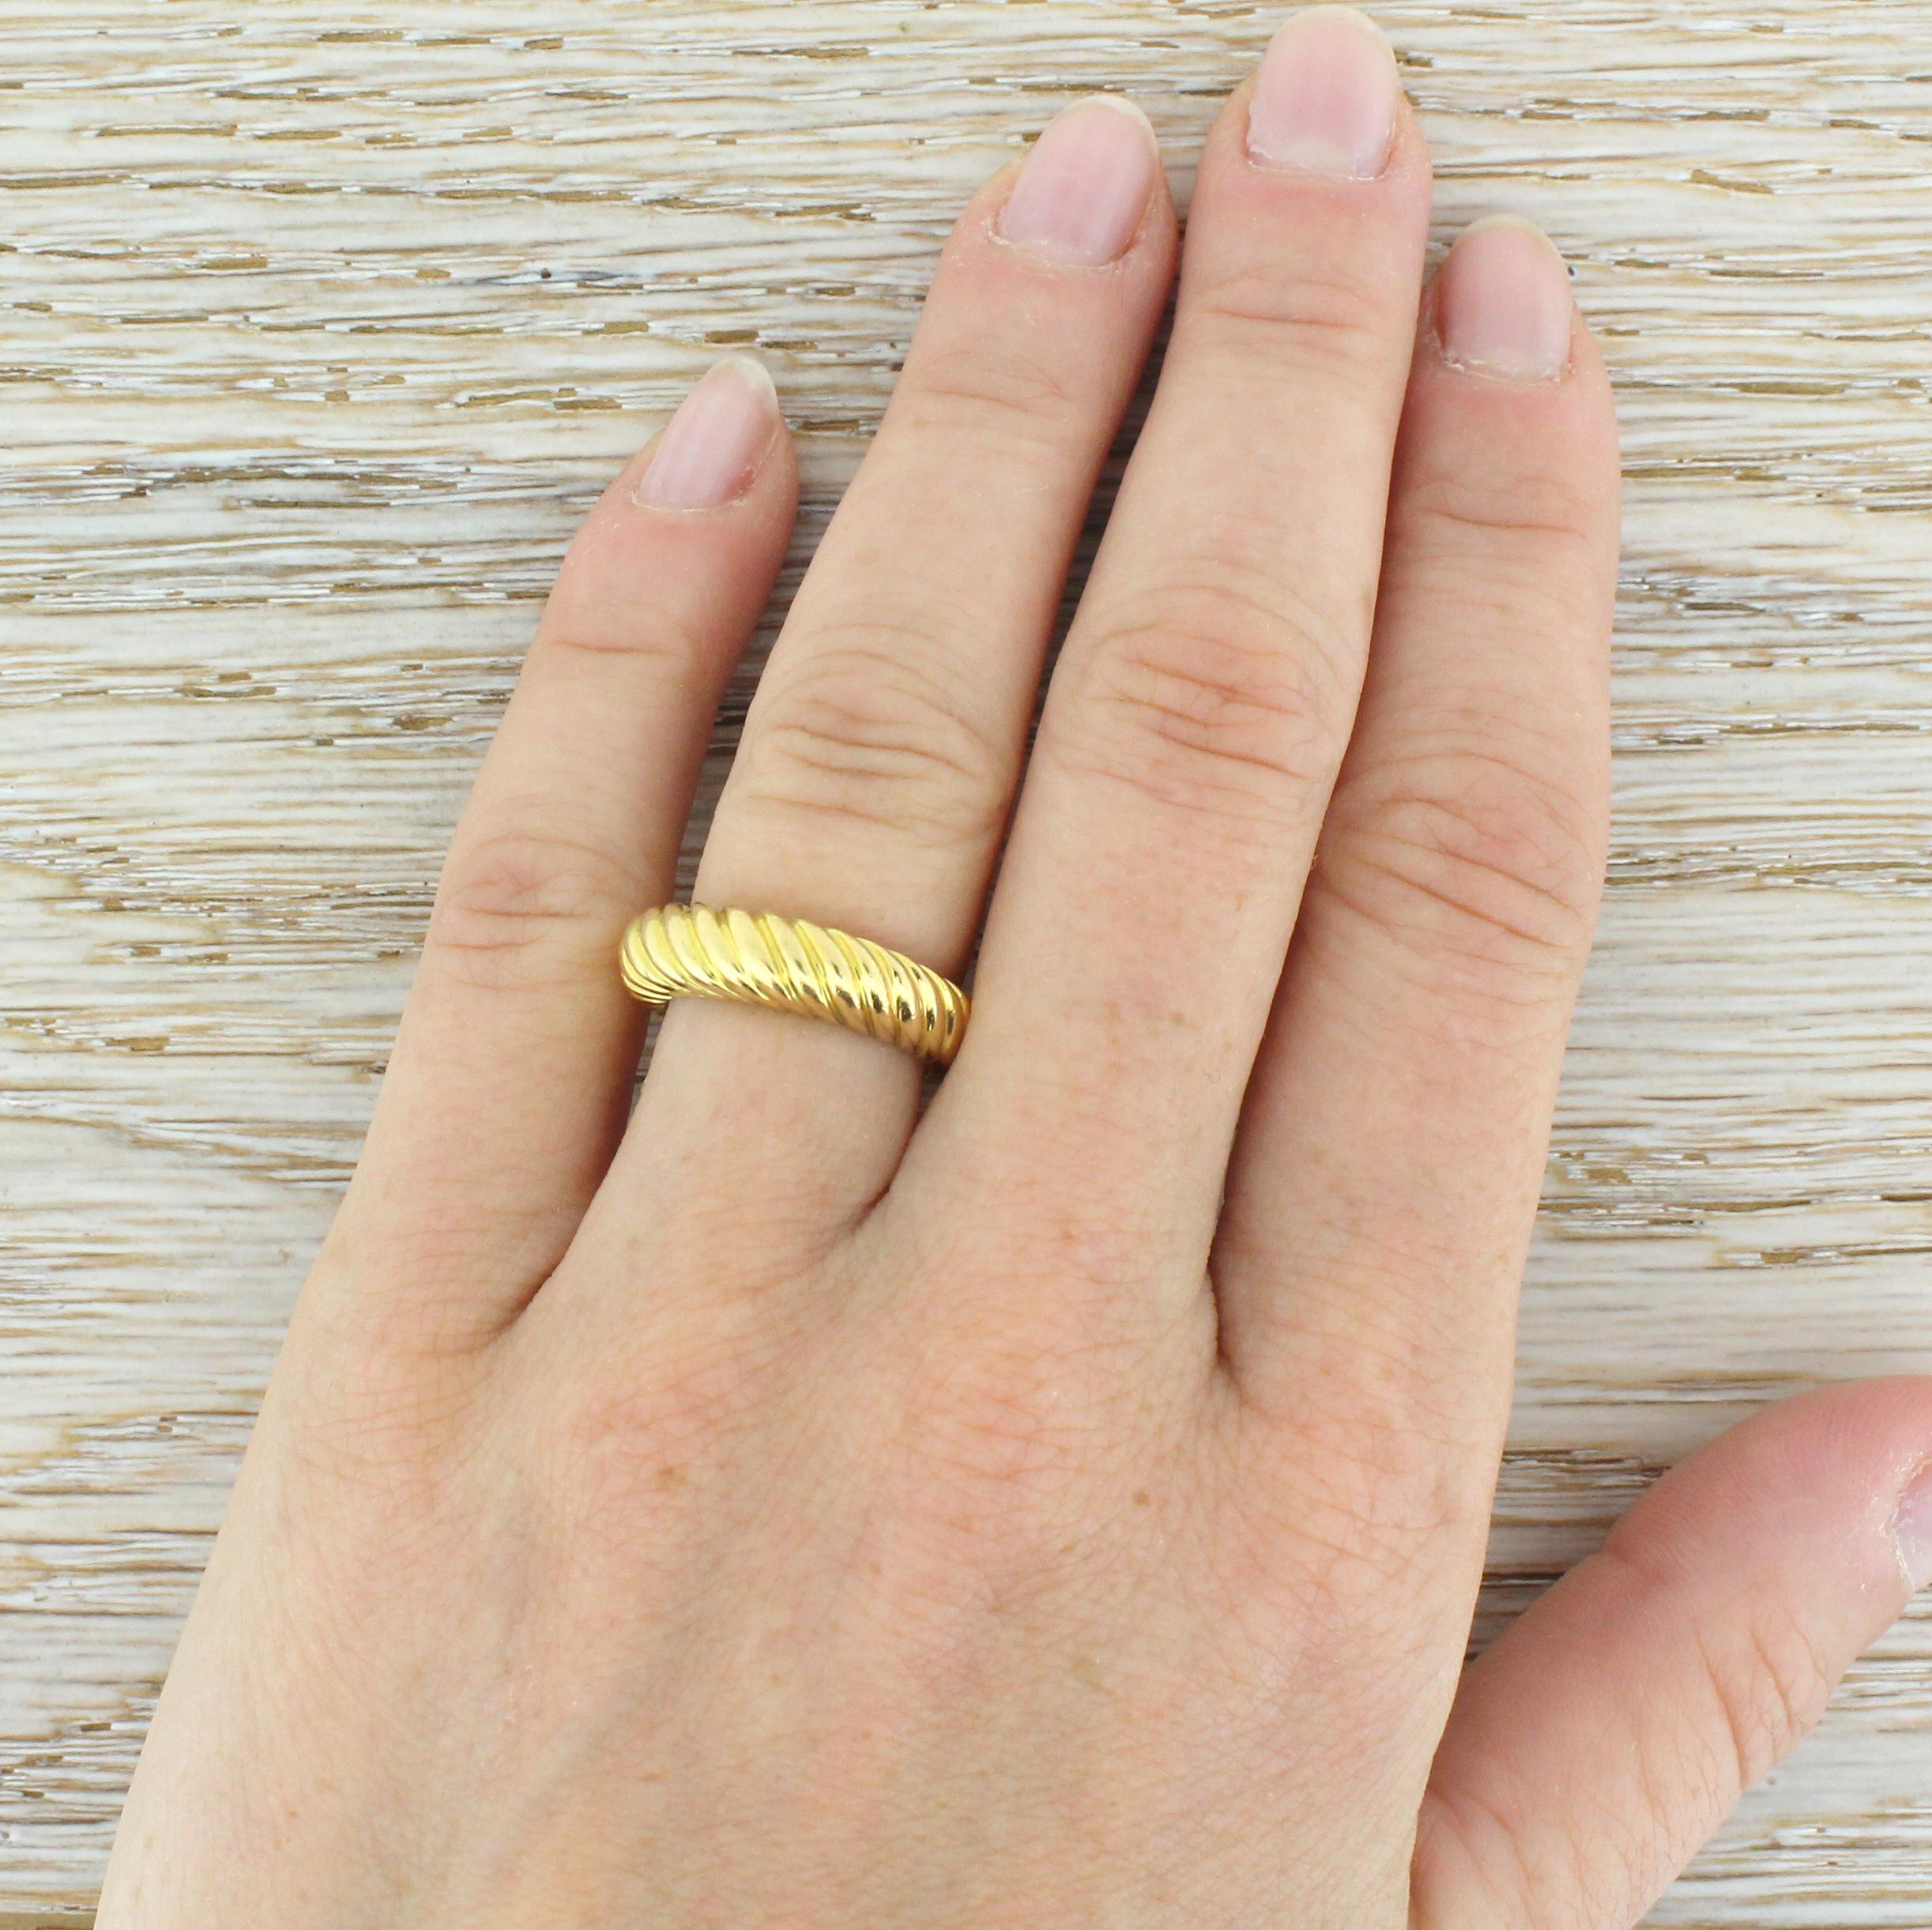 A beautiful and typically quirky band from one of the leading French jewellery houses. This nicely heavy ring graduates in height and weight, with groove detailing continues fully around the ring. Can be worn as an alternative style wedding band or